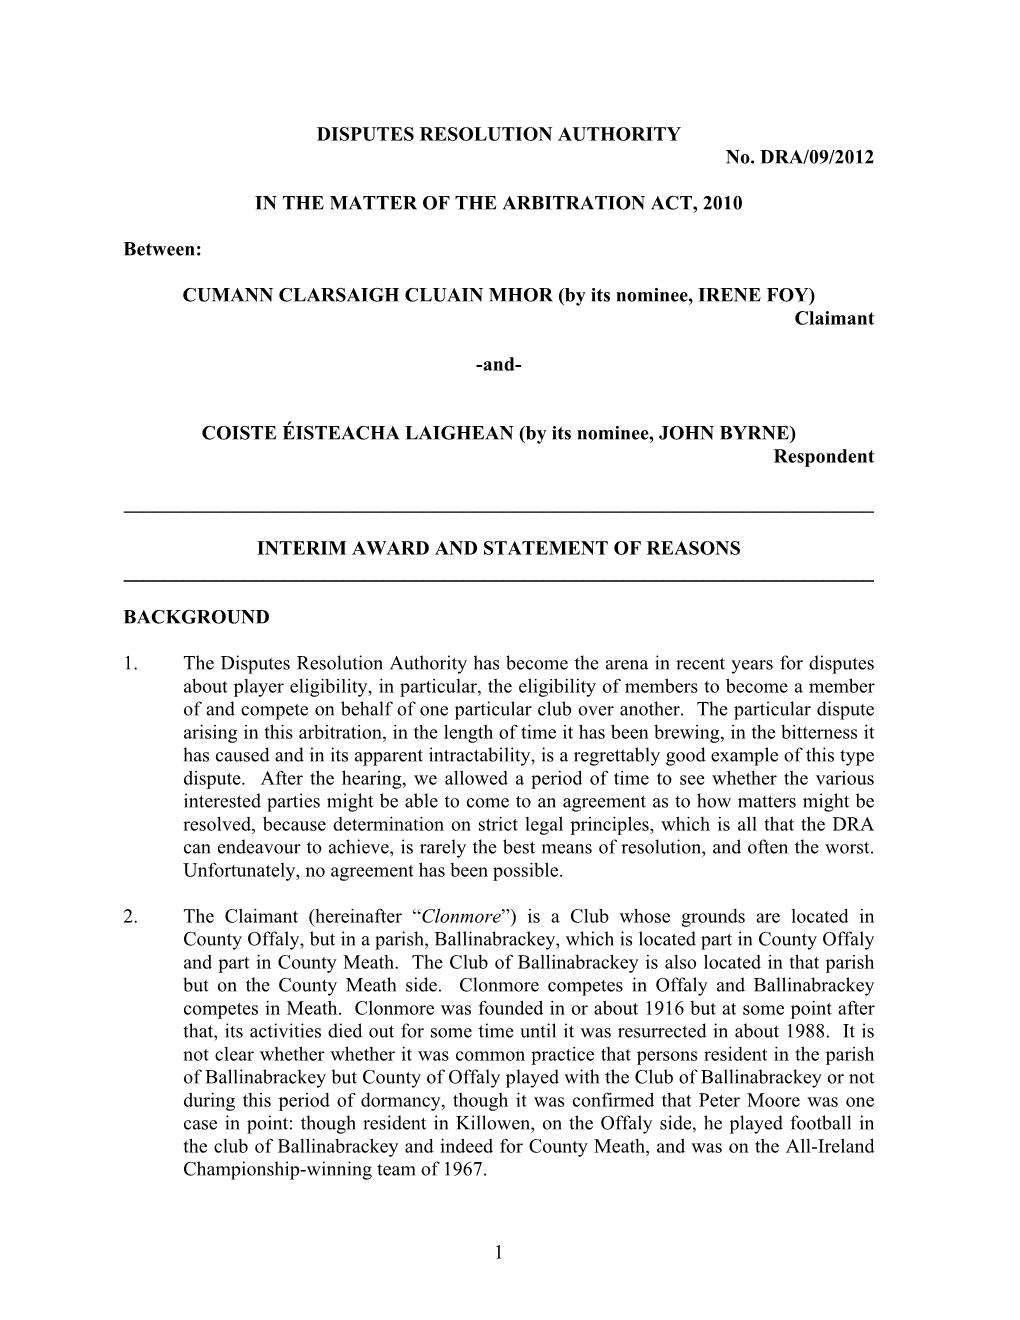 1 DISPUTES RESOLUTION AUTHORITY No. DRA/09/2012 in the MATTER of the ARBITRATION ACT, 2010 Between: CUMANN CLARSAIGH CLUAIN MHOR